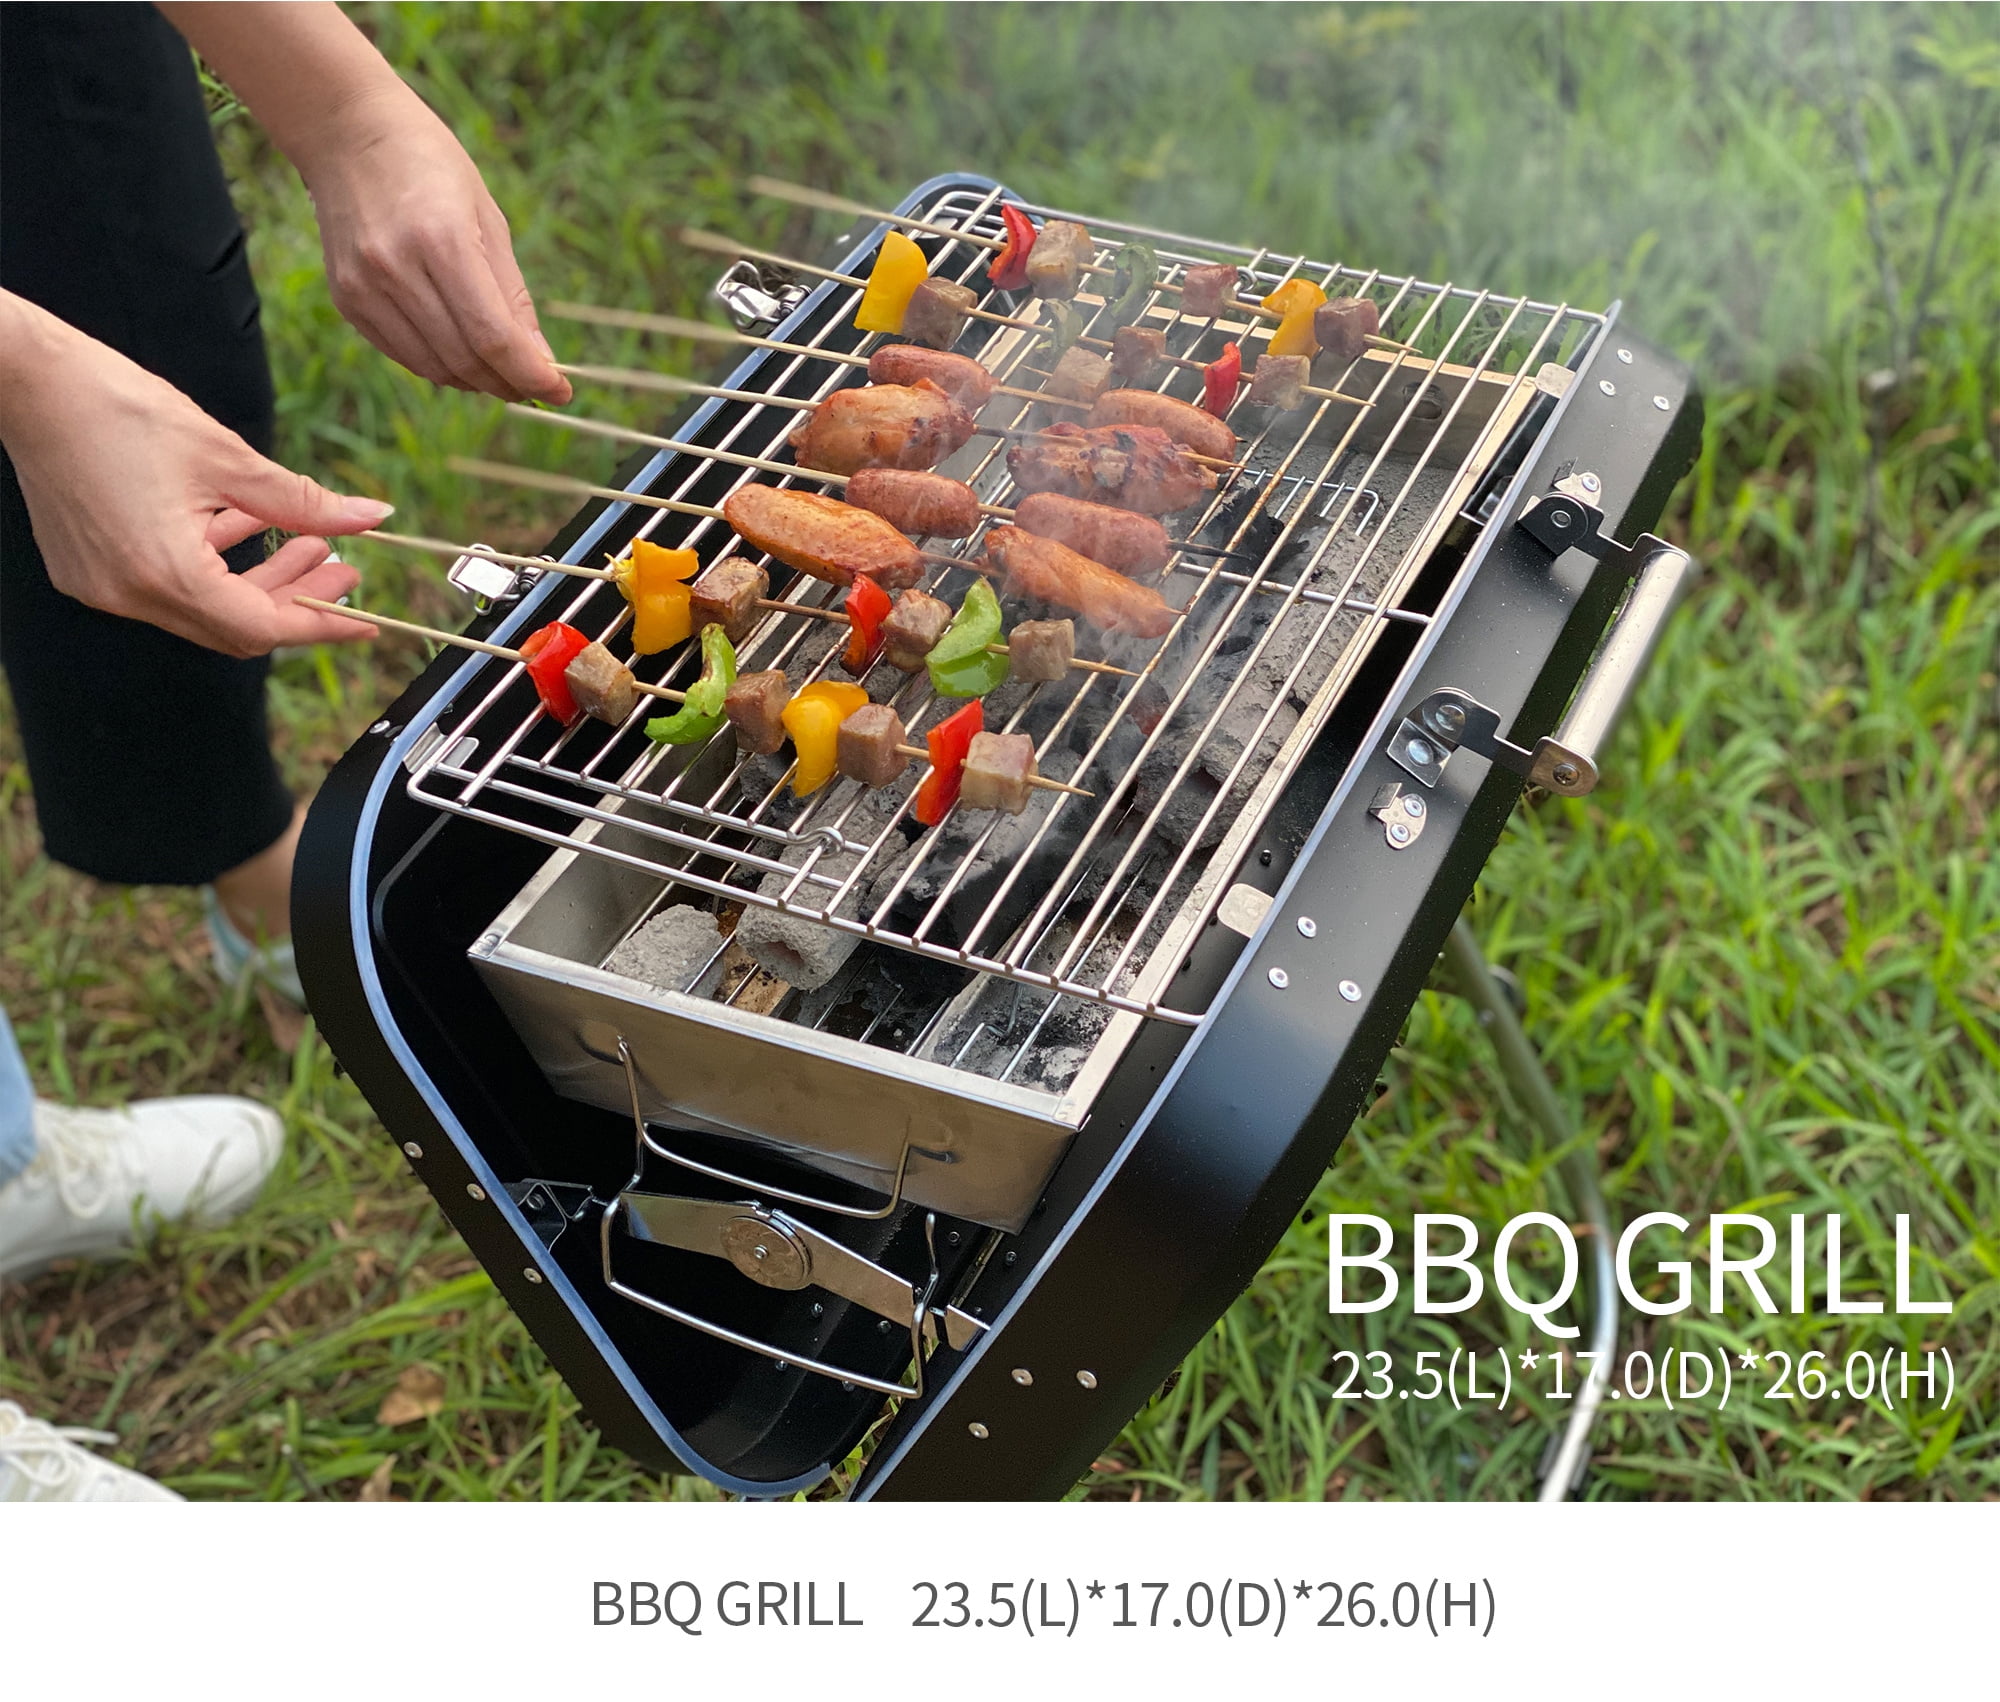 BBQ Portable Charcoal Gril, Stainless Steel Folding Tabletop Charcoal  Barbecue Grill Durable Tabletop Barbecue Smokers Tool Kits for Outdoor  Picnic 